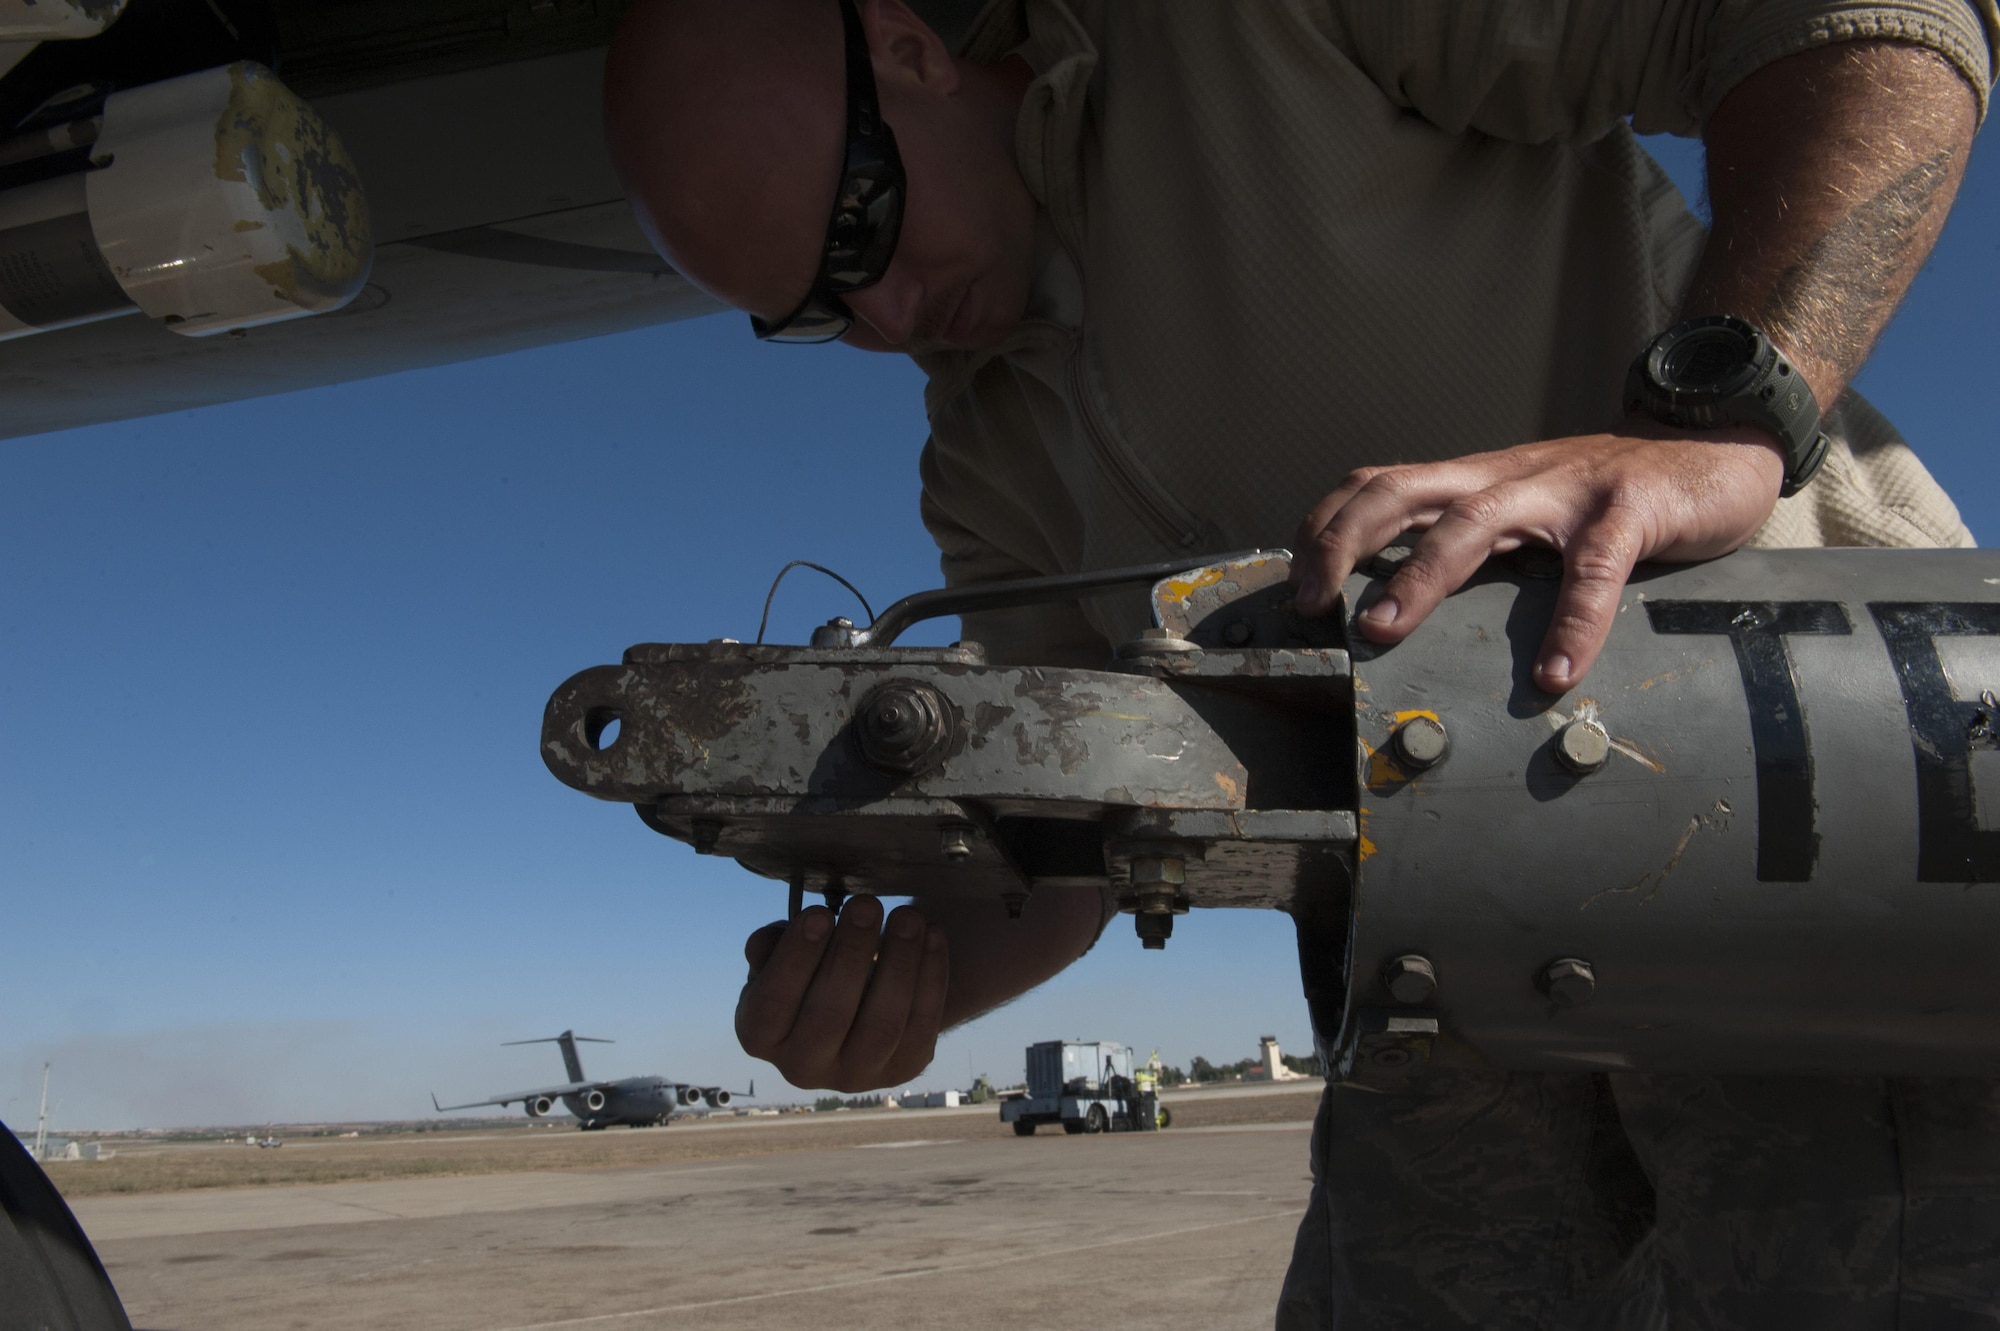 U.S. Air Force  Staff Sgt. Brian, 447th Expeditionary Aircraft Maintenance Squadron crew chief, unhooks a tow bar from the front of a KC-135 Stratotanker Nov. 11, 2016, at Incirlik Air Base, Turkey. The KC-135 Stratotanker has provided core U.S. Air Force aerial refueling capability for more than 50 years. (U.S. Air Force photo by Staff Sgt. Jack Sanders) 